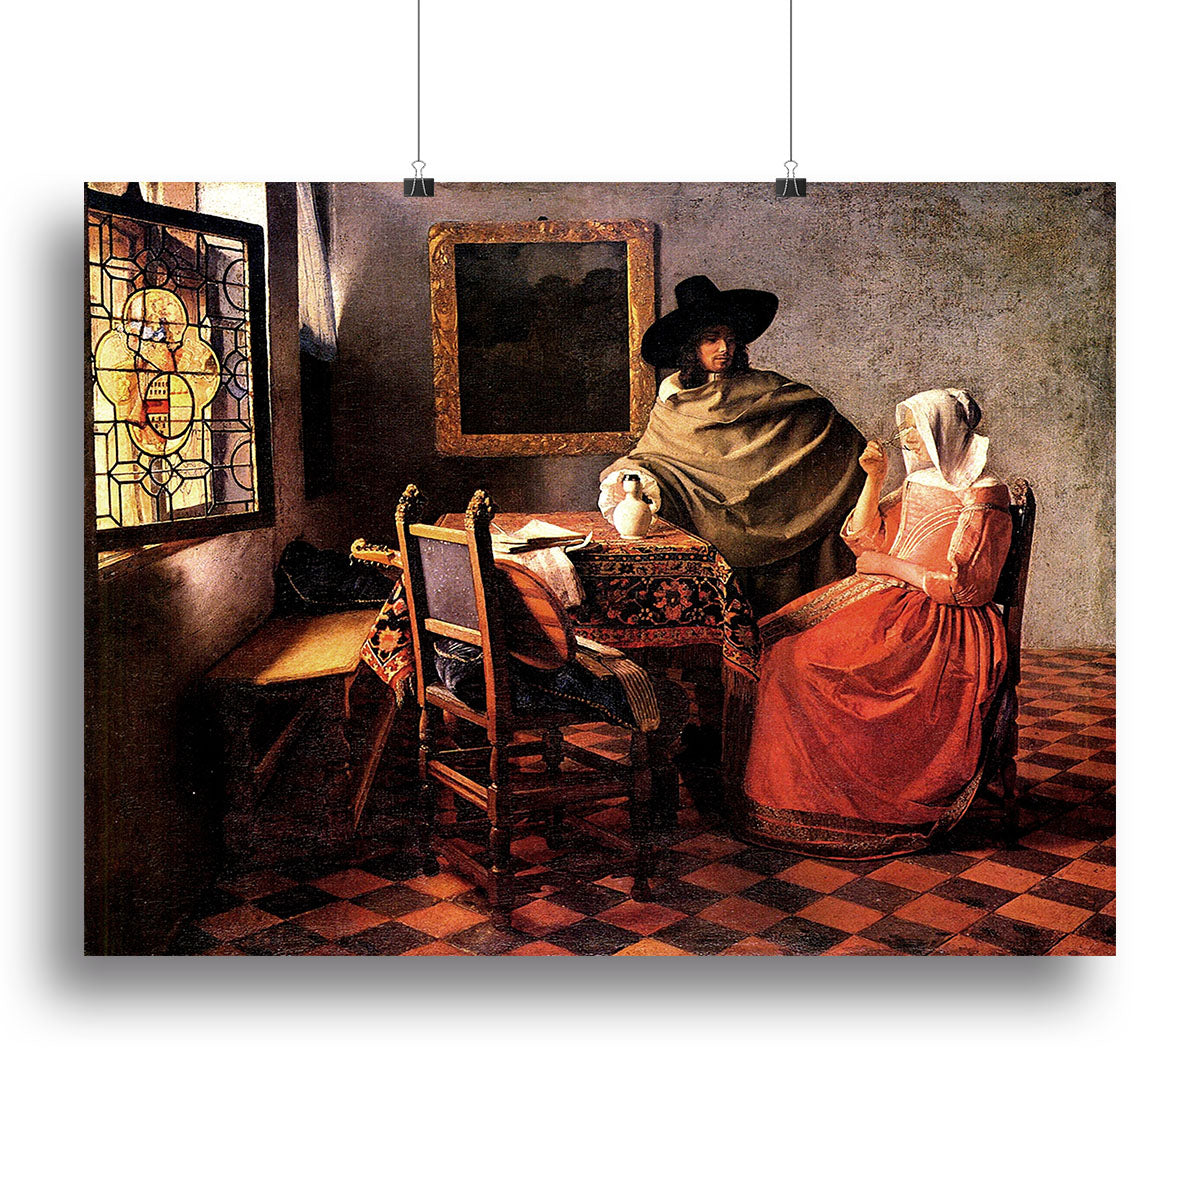 Glass of wine by Vermeer Canvas Print or Poster - Canvas Art Rocks - 2